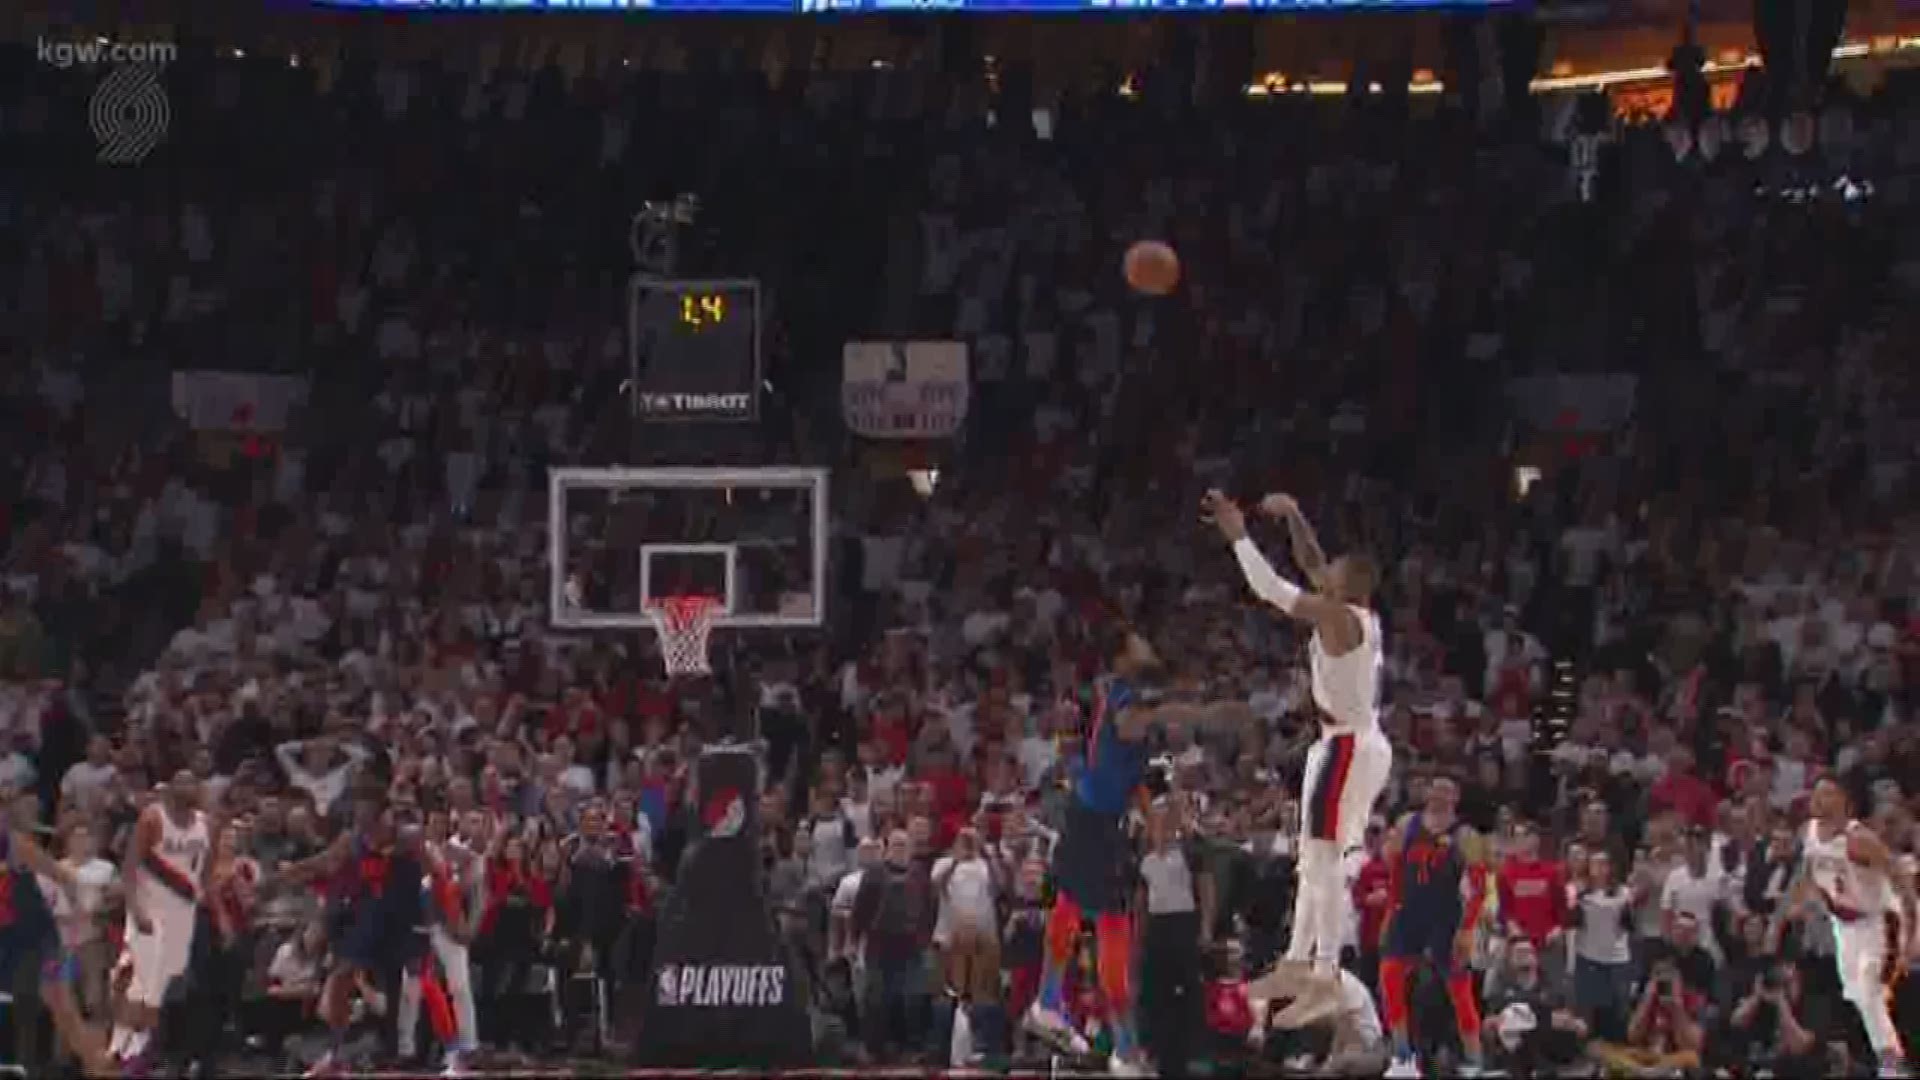 KGW sports anchor Orlando Sanchez recalls what it was like at the Moda Center when Damian Lilliard dropped a 37-foot shot to beat the Thunder.